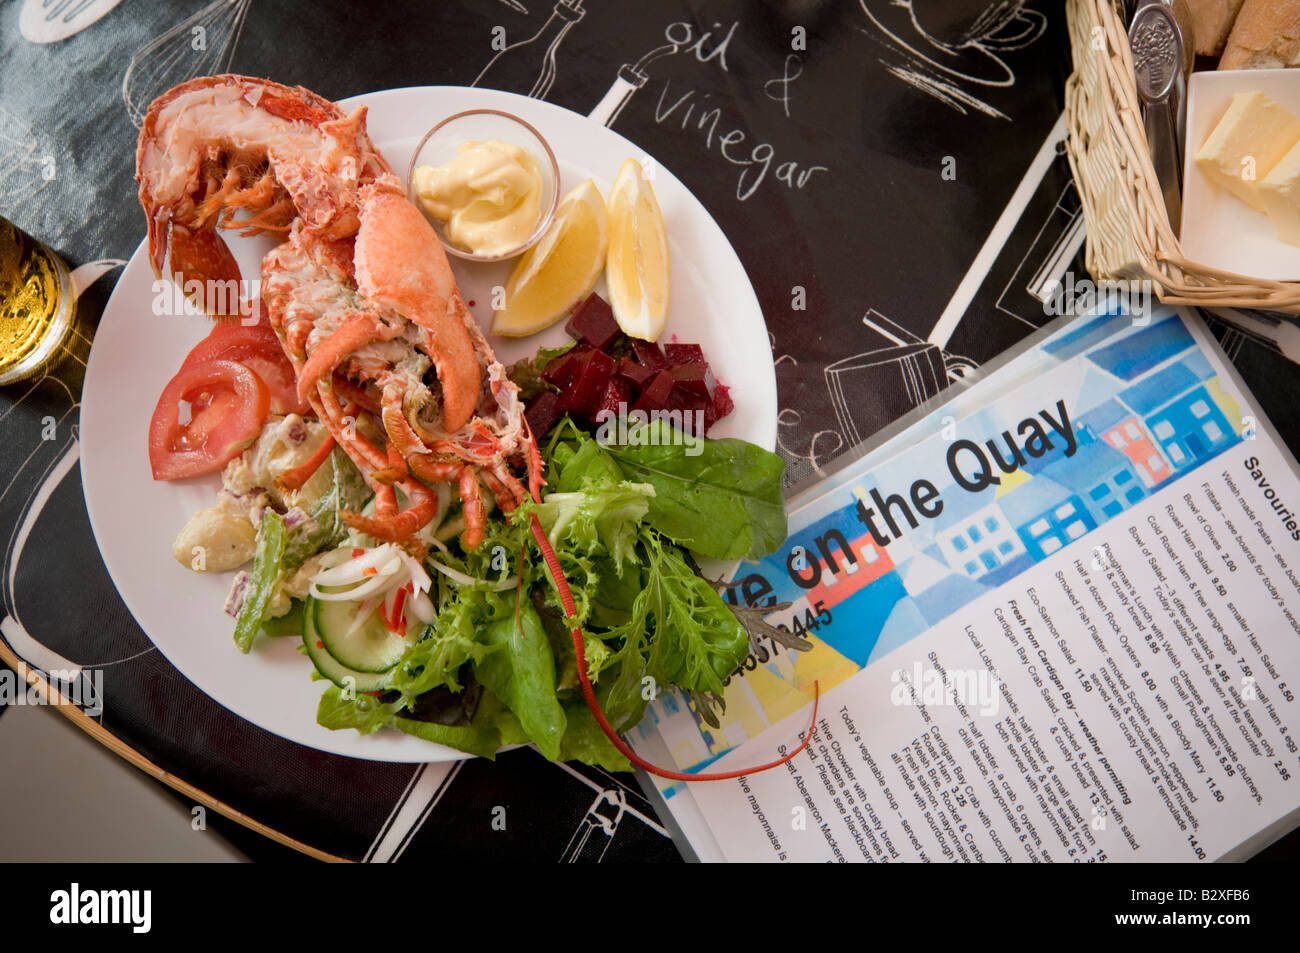 Platter of cardigan bay fresh lobster salad in the Hive on the Quay seafood cafe bar restaurant Aberaeron Ceredigion Wales UK Stock Photo